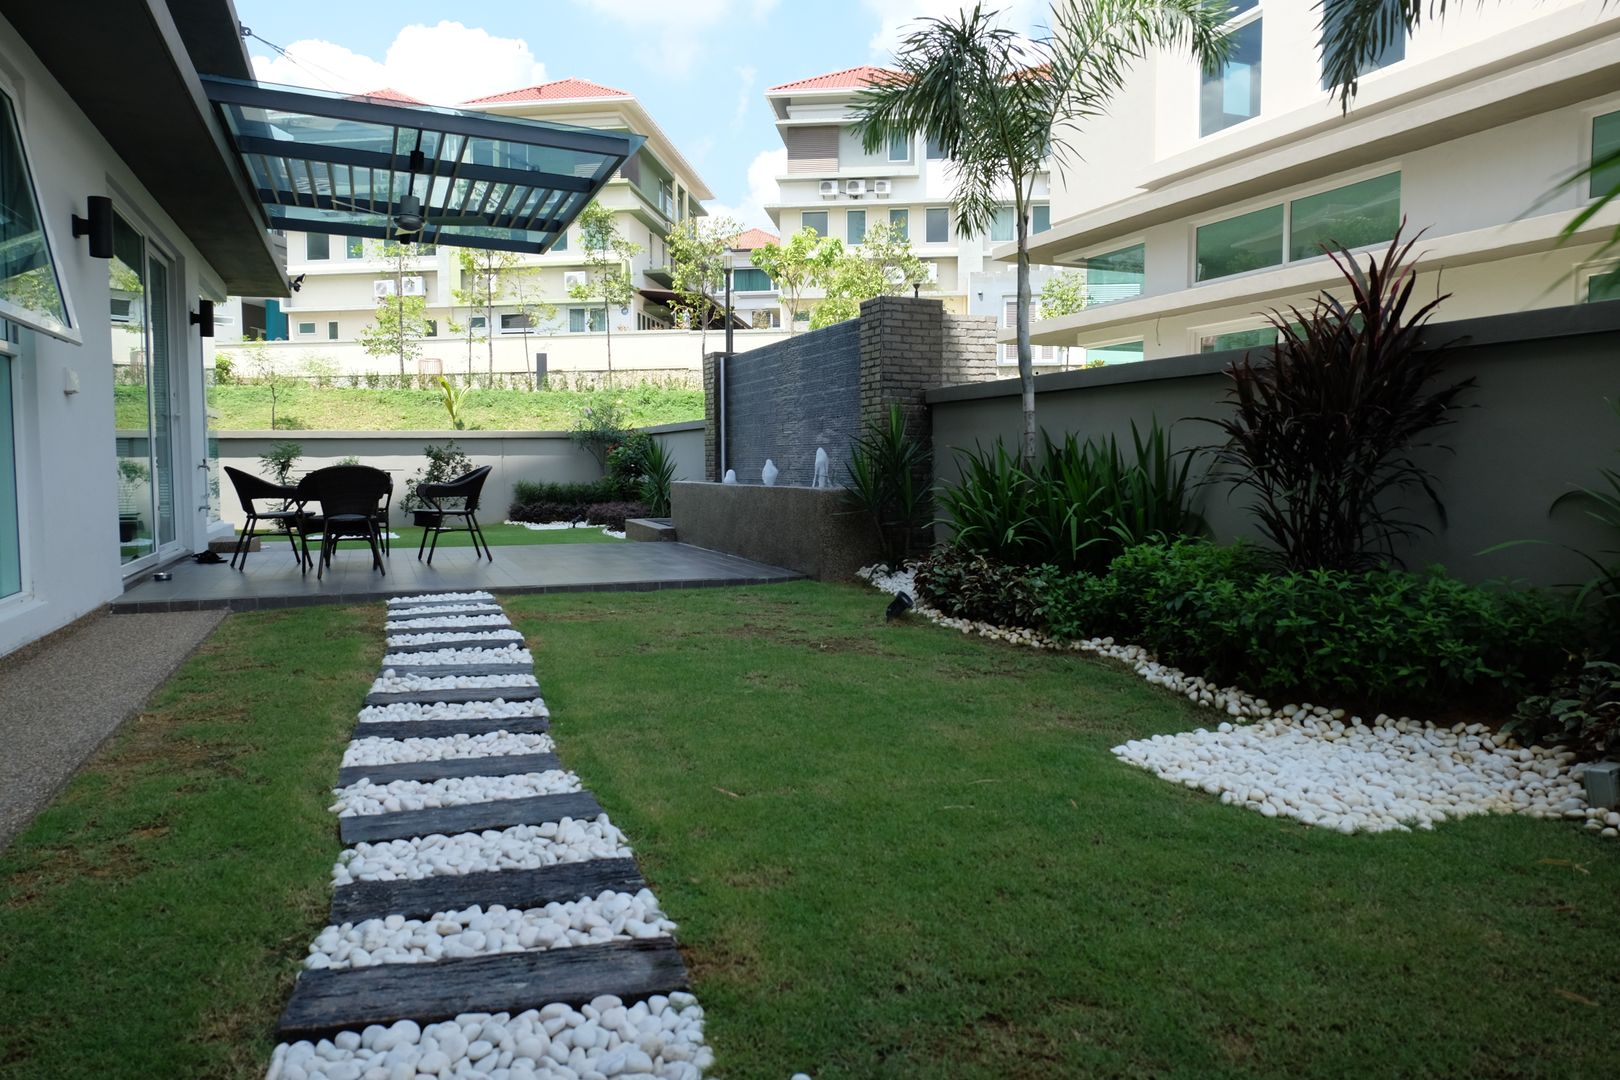 Contemporary Tropical , 3-Storey semi-D, inDfinity Design (M) SDN BHD inDfinity Design (M) SDN BHD Tropical style garden